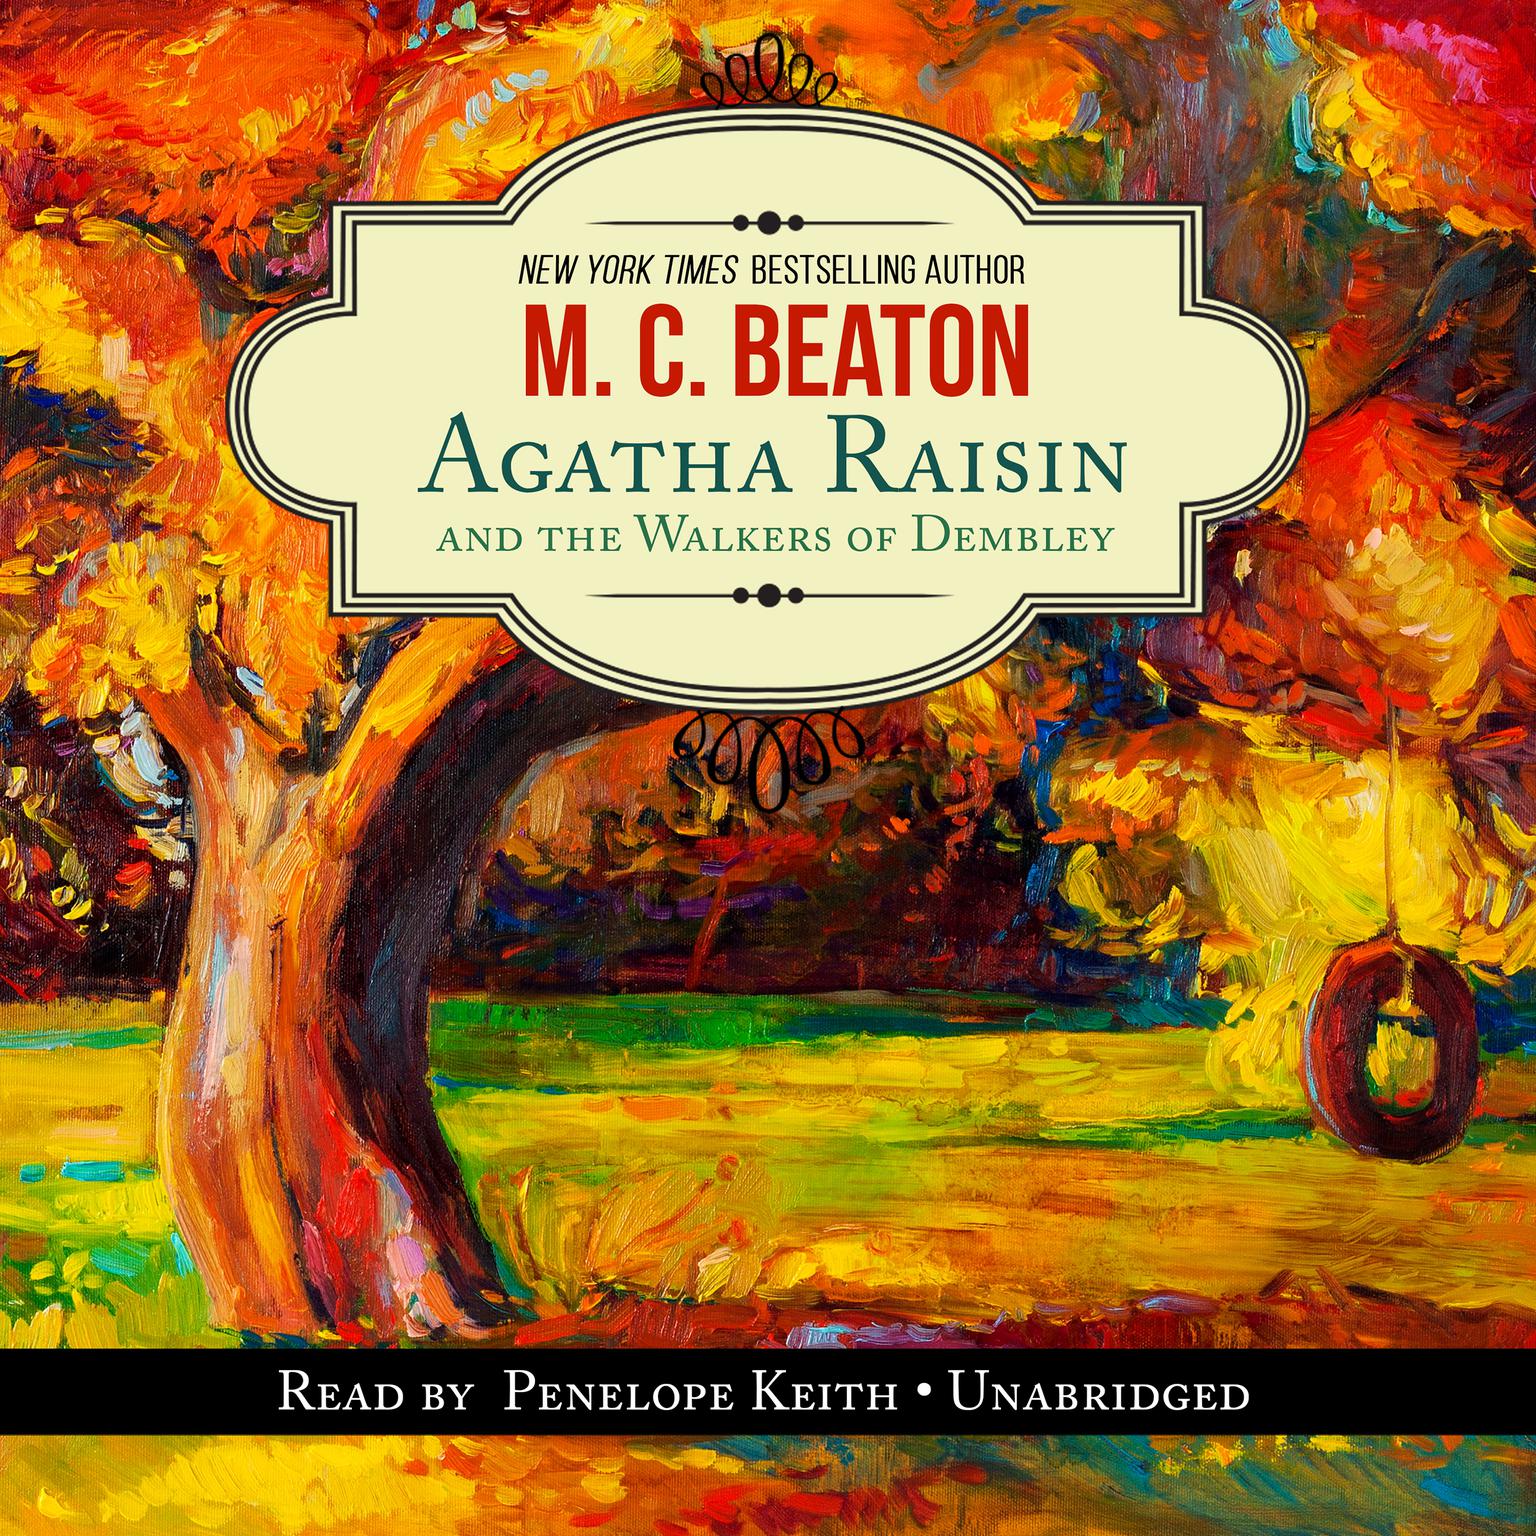 Agatha Raisin and the Walkers of Dembley Audiobook, by M. C. Beaton